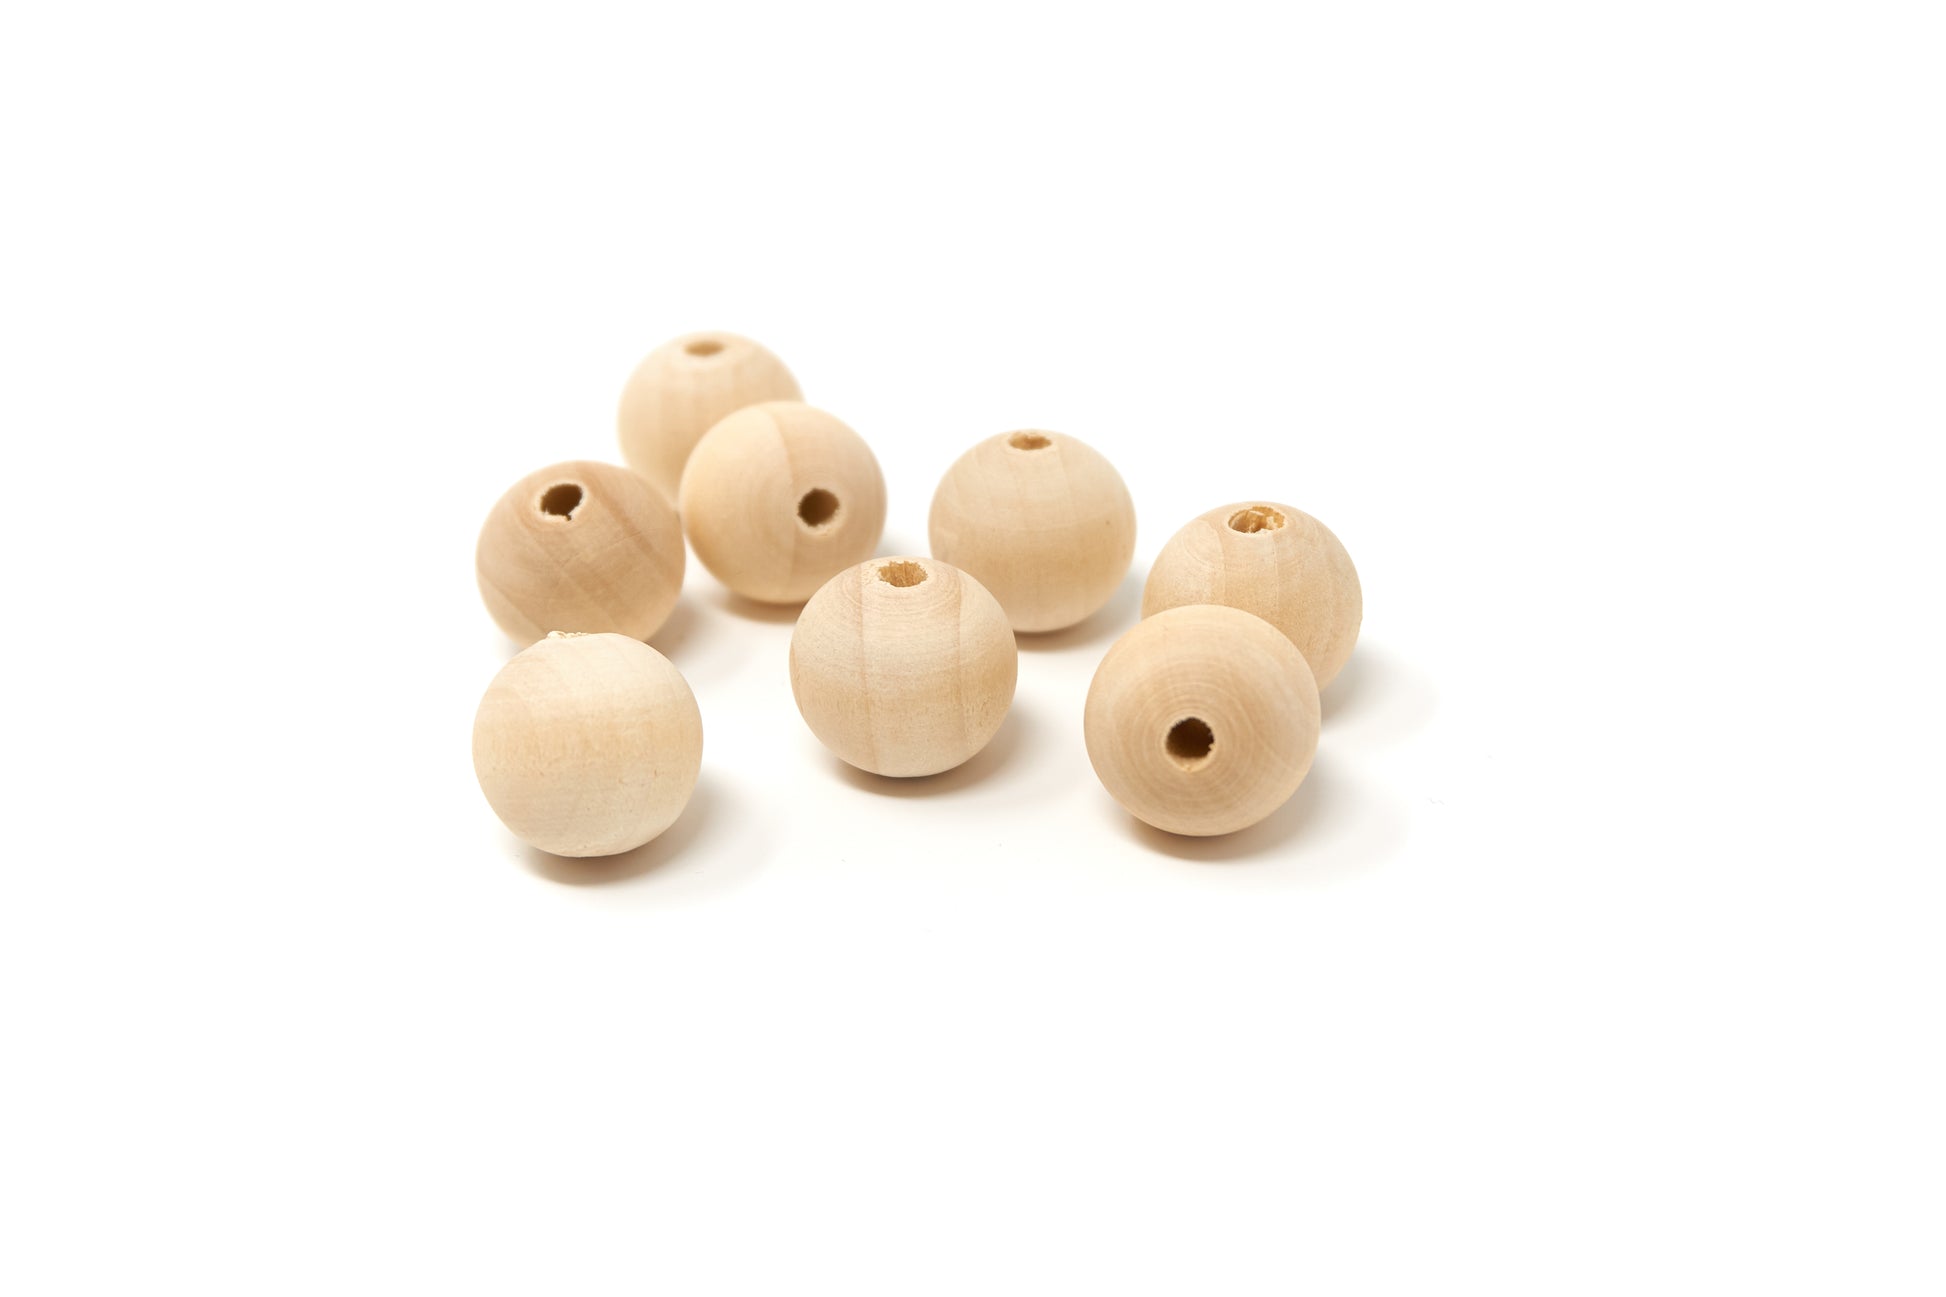 Natural Round Wood Beads 20mm 50 pieces - Cameos Art Shop